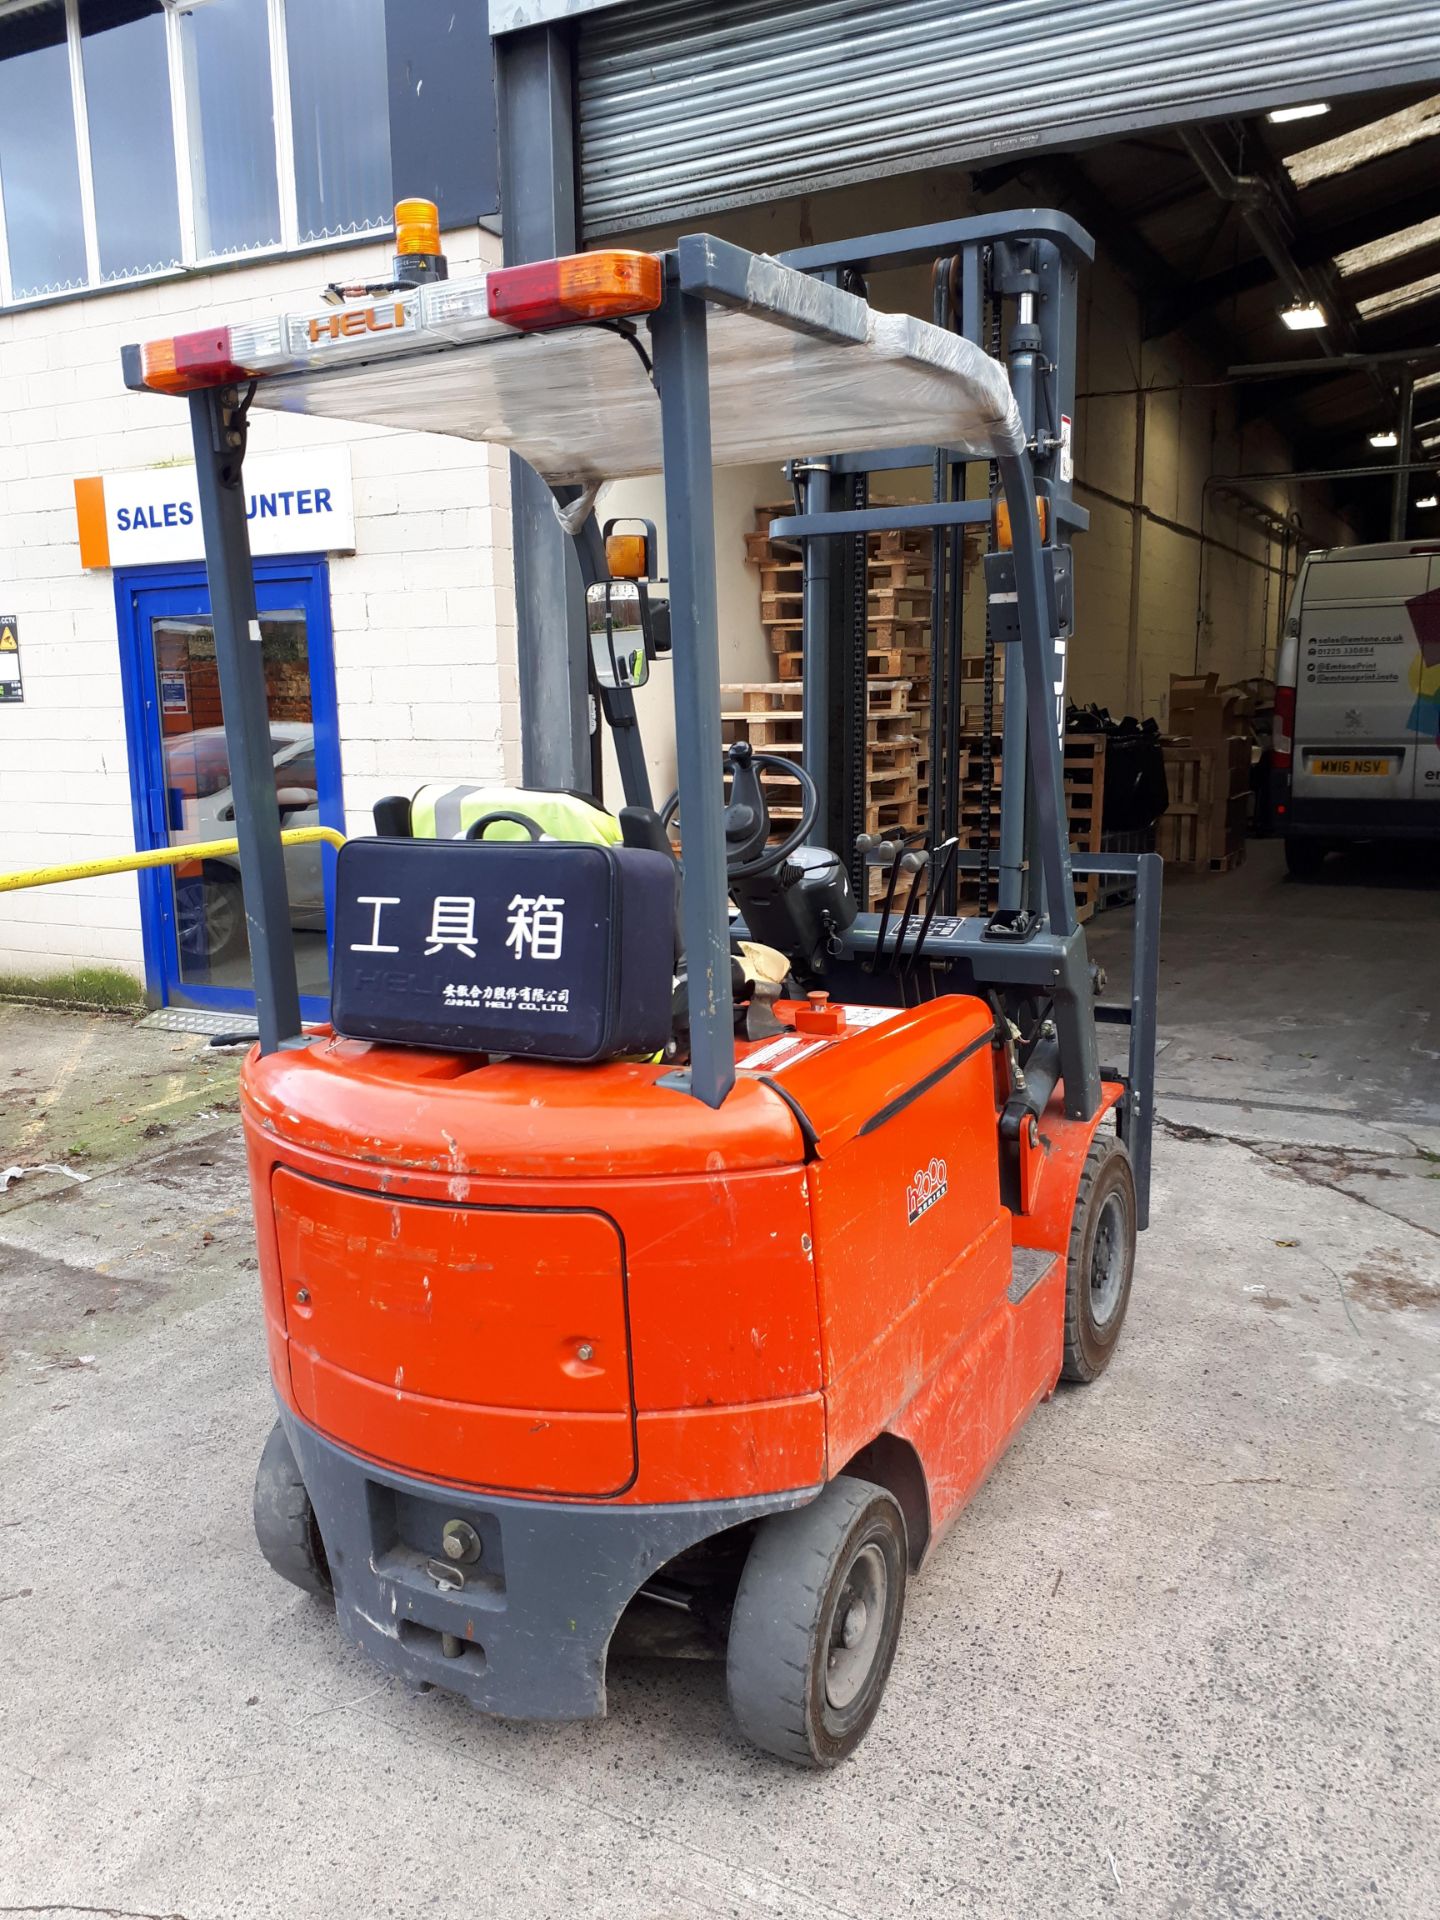 Heli HFP15 1.5Ton Electric Forklift Truck, Twin Stage Mast, Serial Number G3355 (2009) 1,566.0 - Image 5 of 10